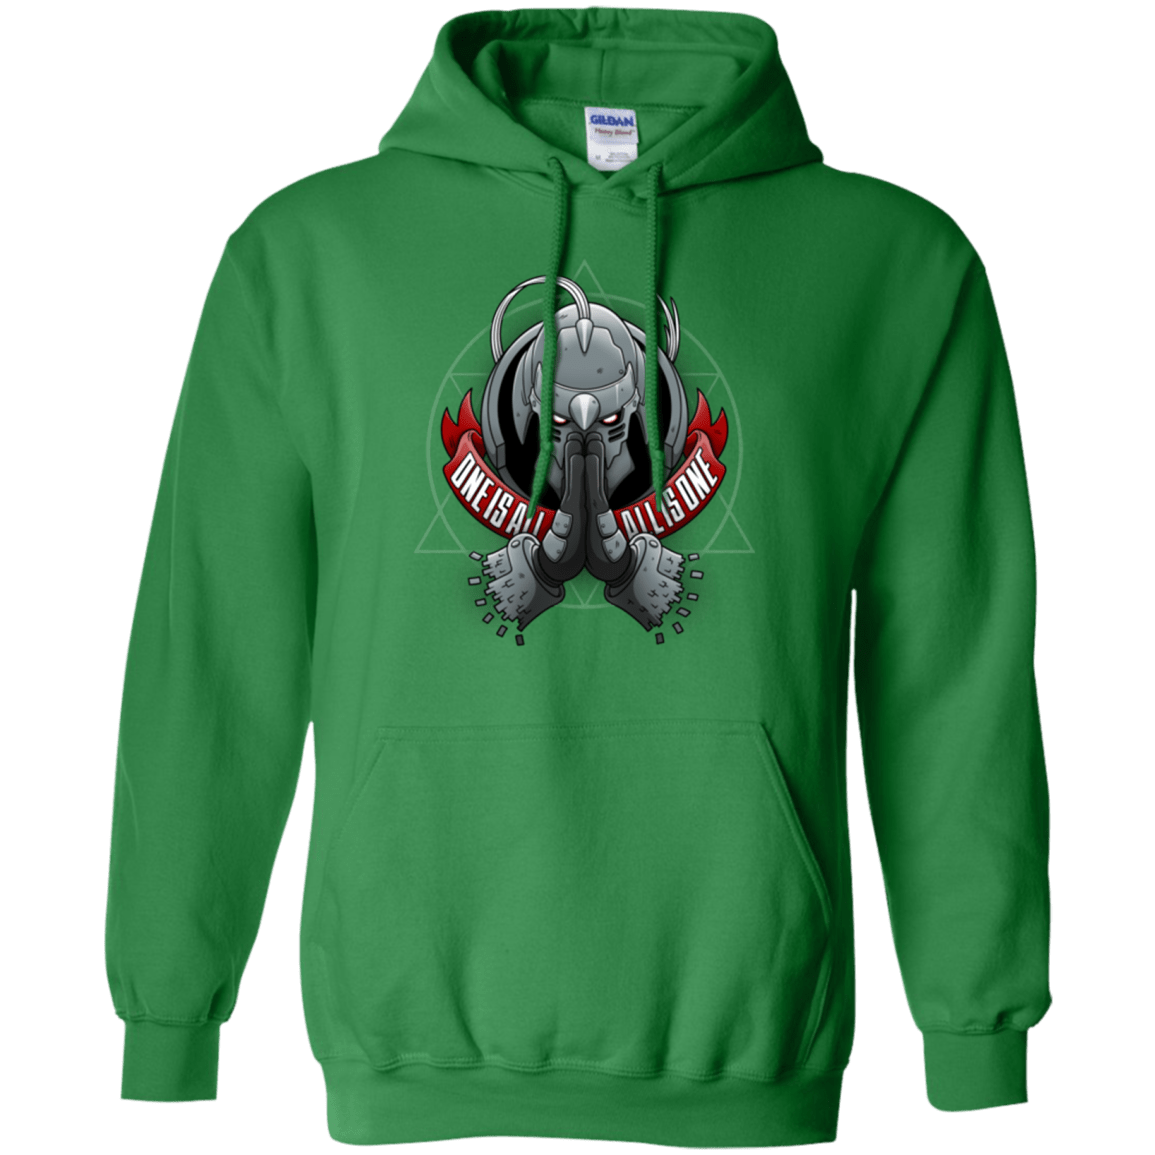 Sweatshirts Irish Green / Small ONE IS ALL ALL IS ONE Pullover Hoodie